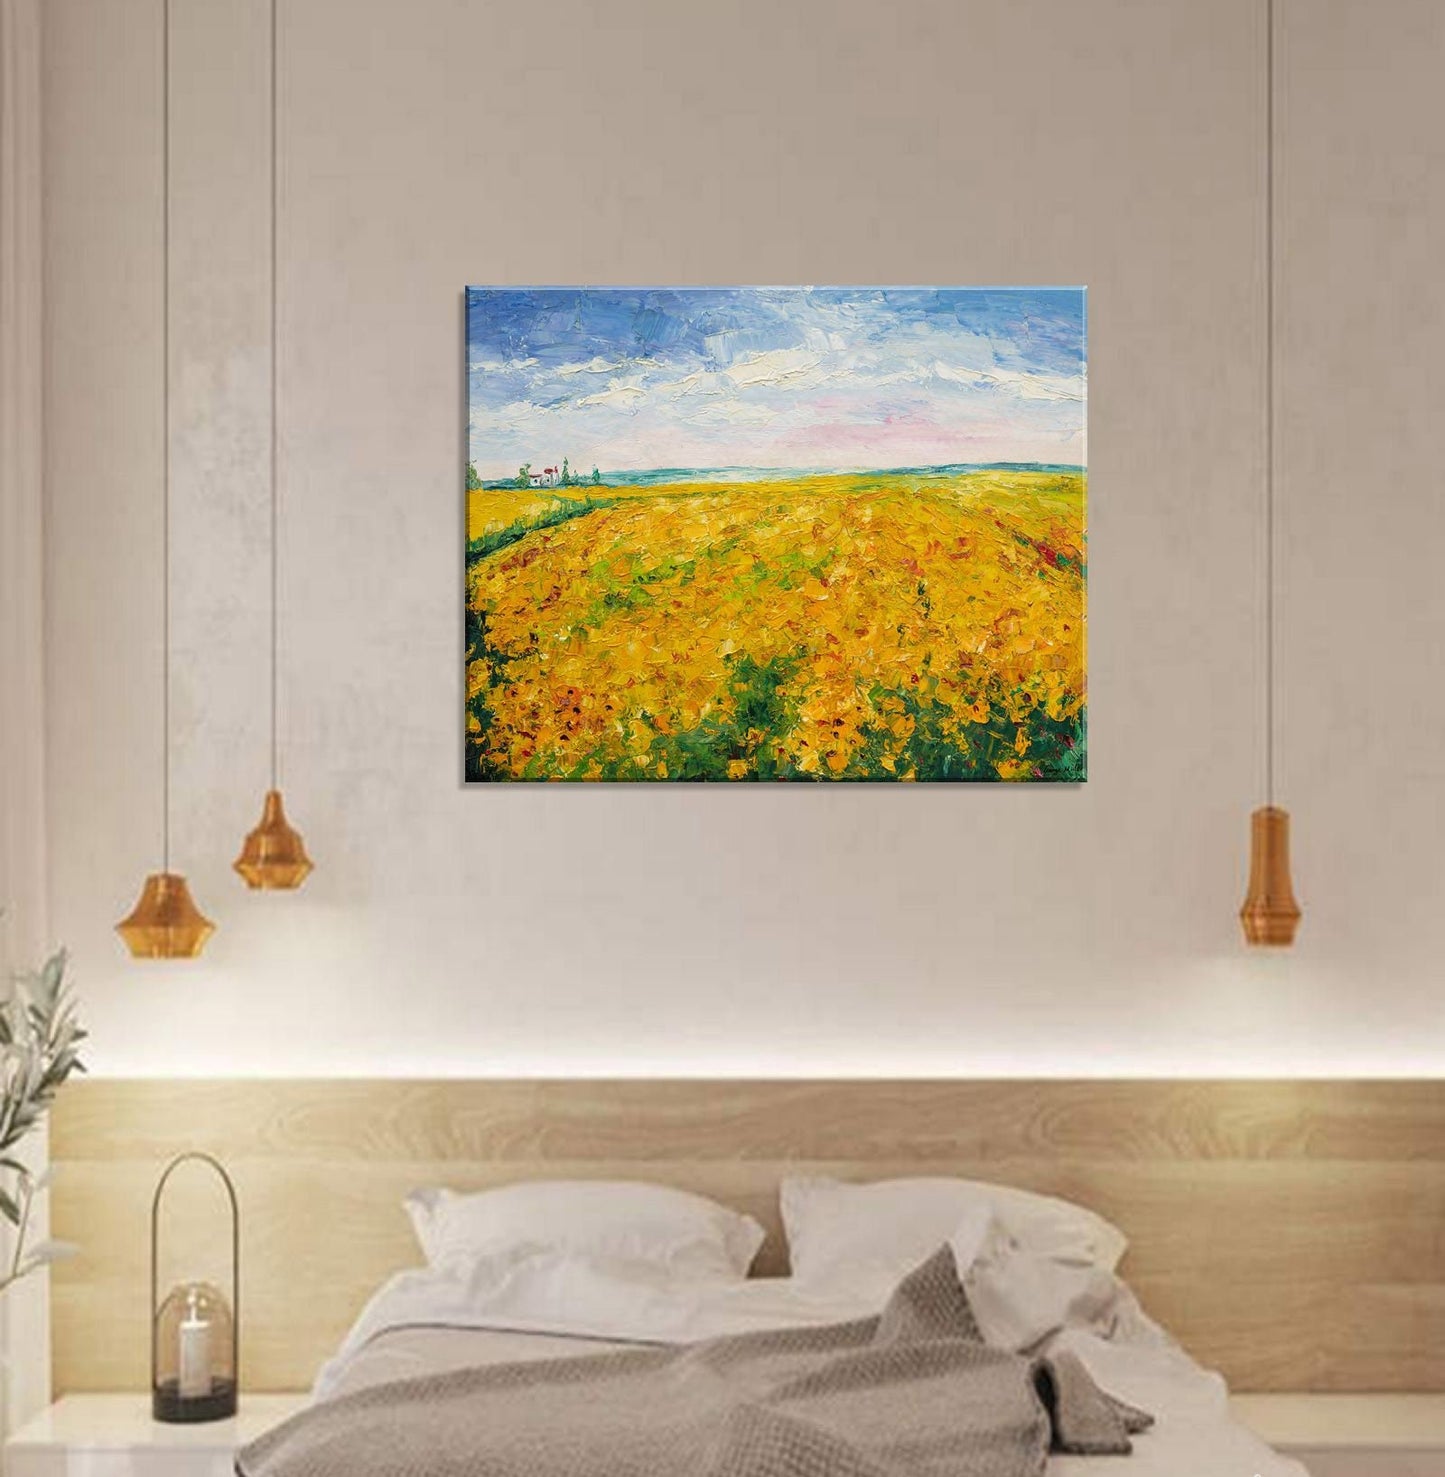 Abstract Art, Contemporary Art, Original Abstract Painting, Canvas Painting, 48" Oil Painting, Tunscany Sunflower Field, Canvas Wall Decor